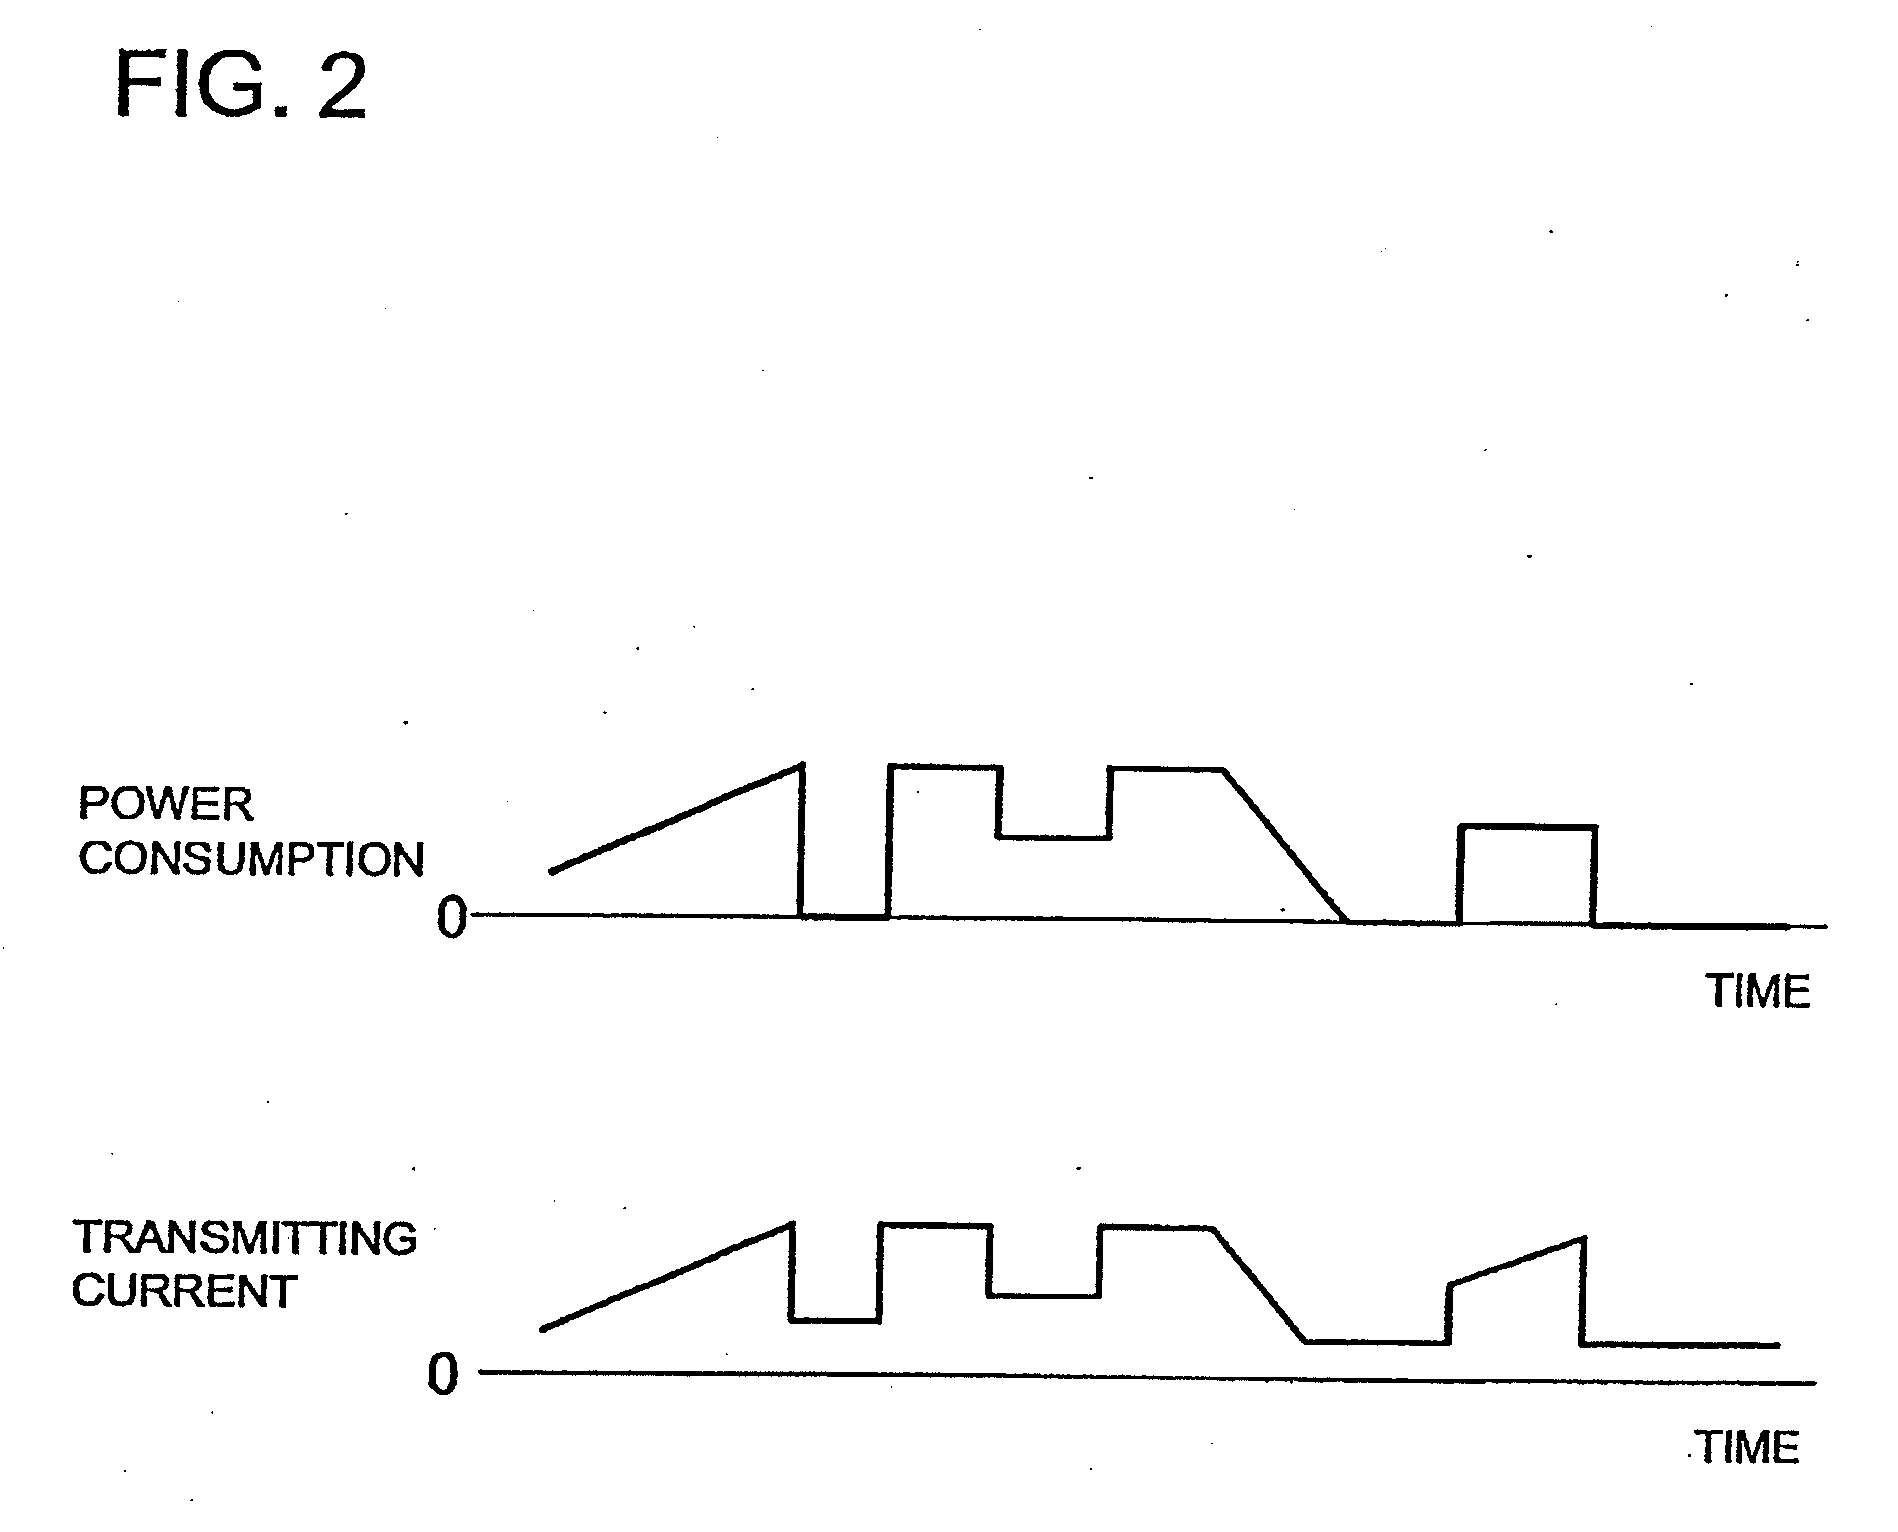 Method of data transmission embedded in electric power transmission, and a charging stand and battery device using that data transmission